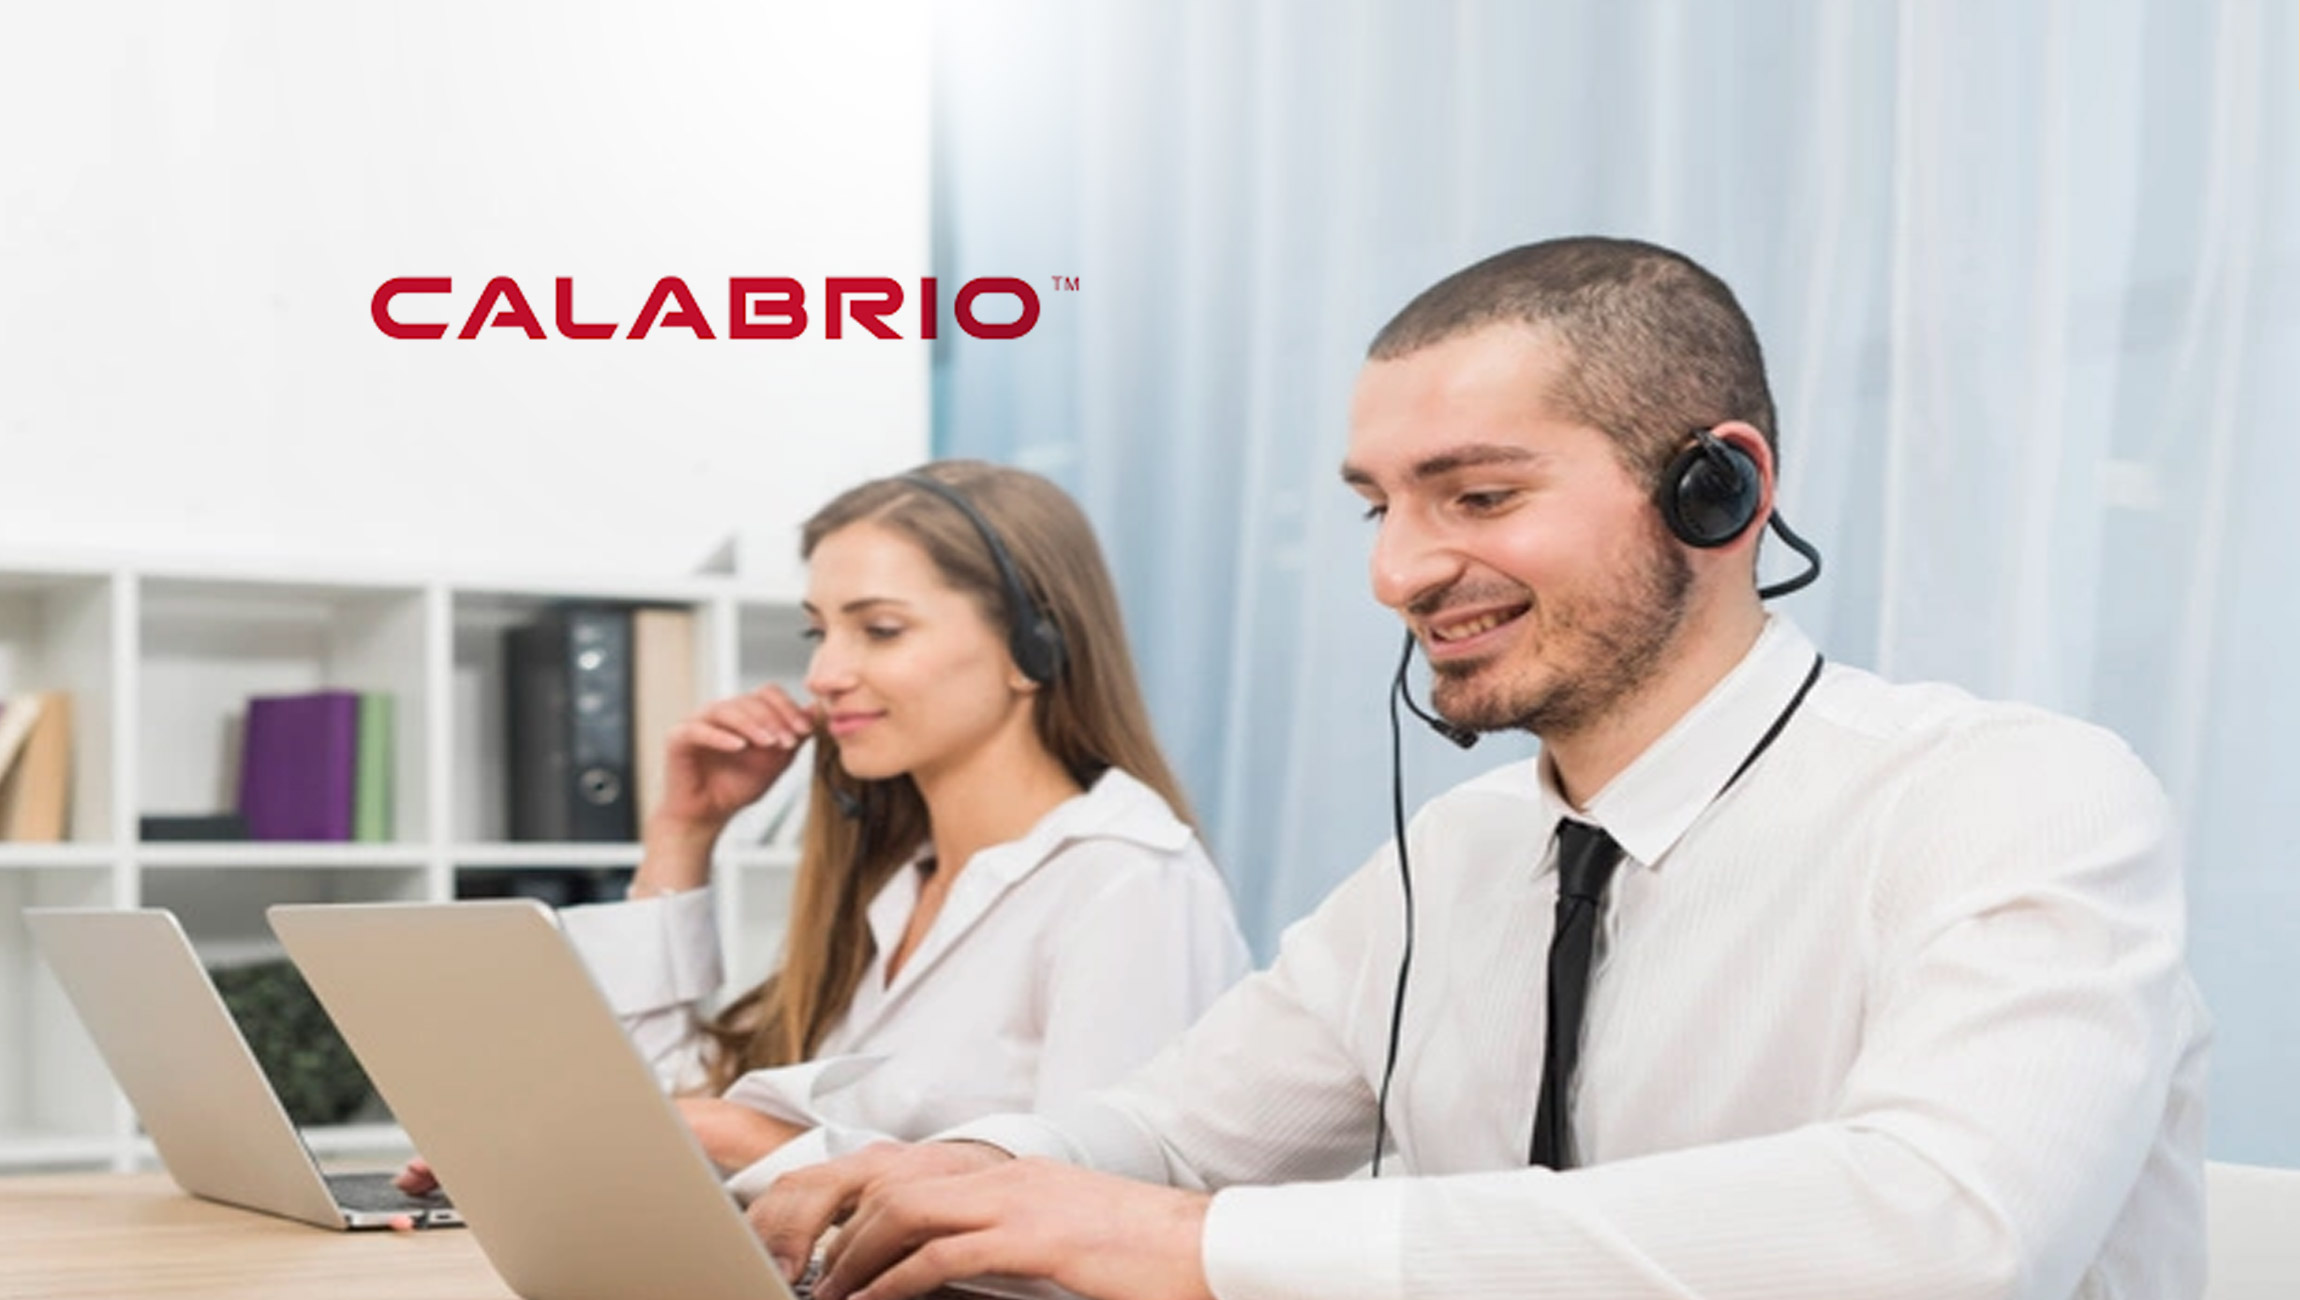 Contact Centers and Brands “Power UP!” at Calabrio Customer Connect 2022